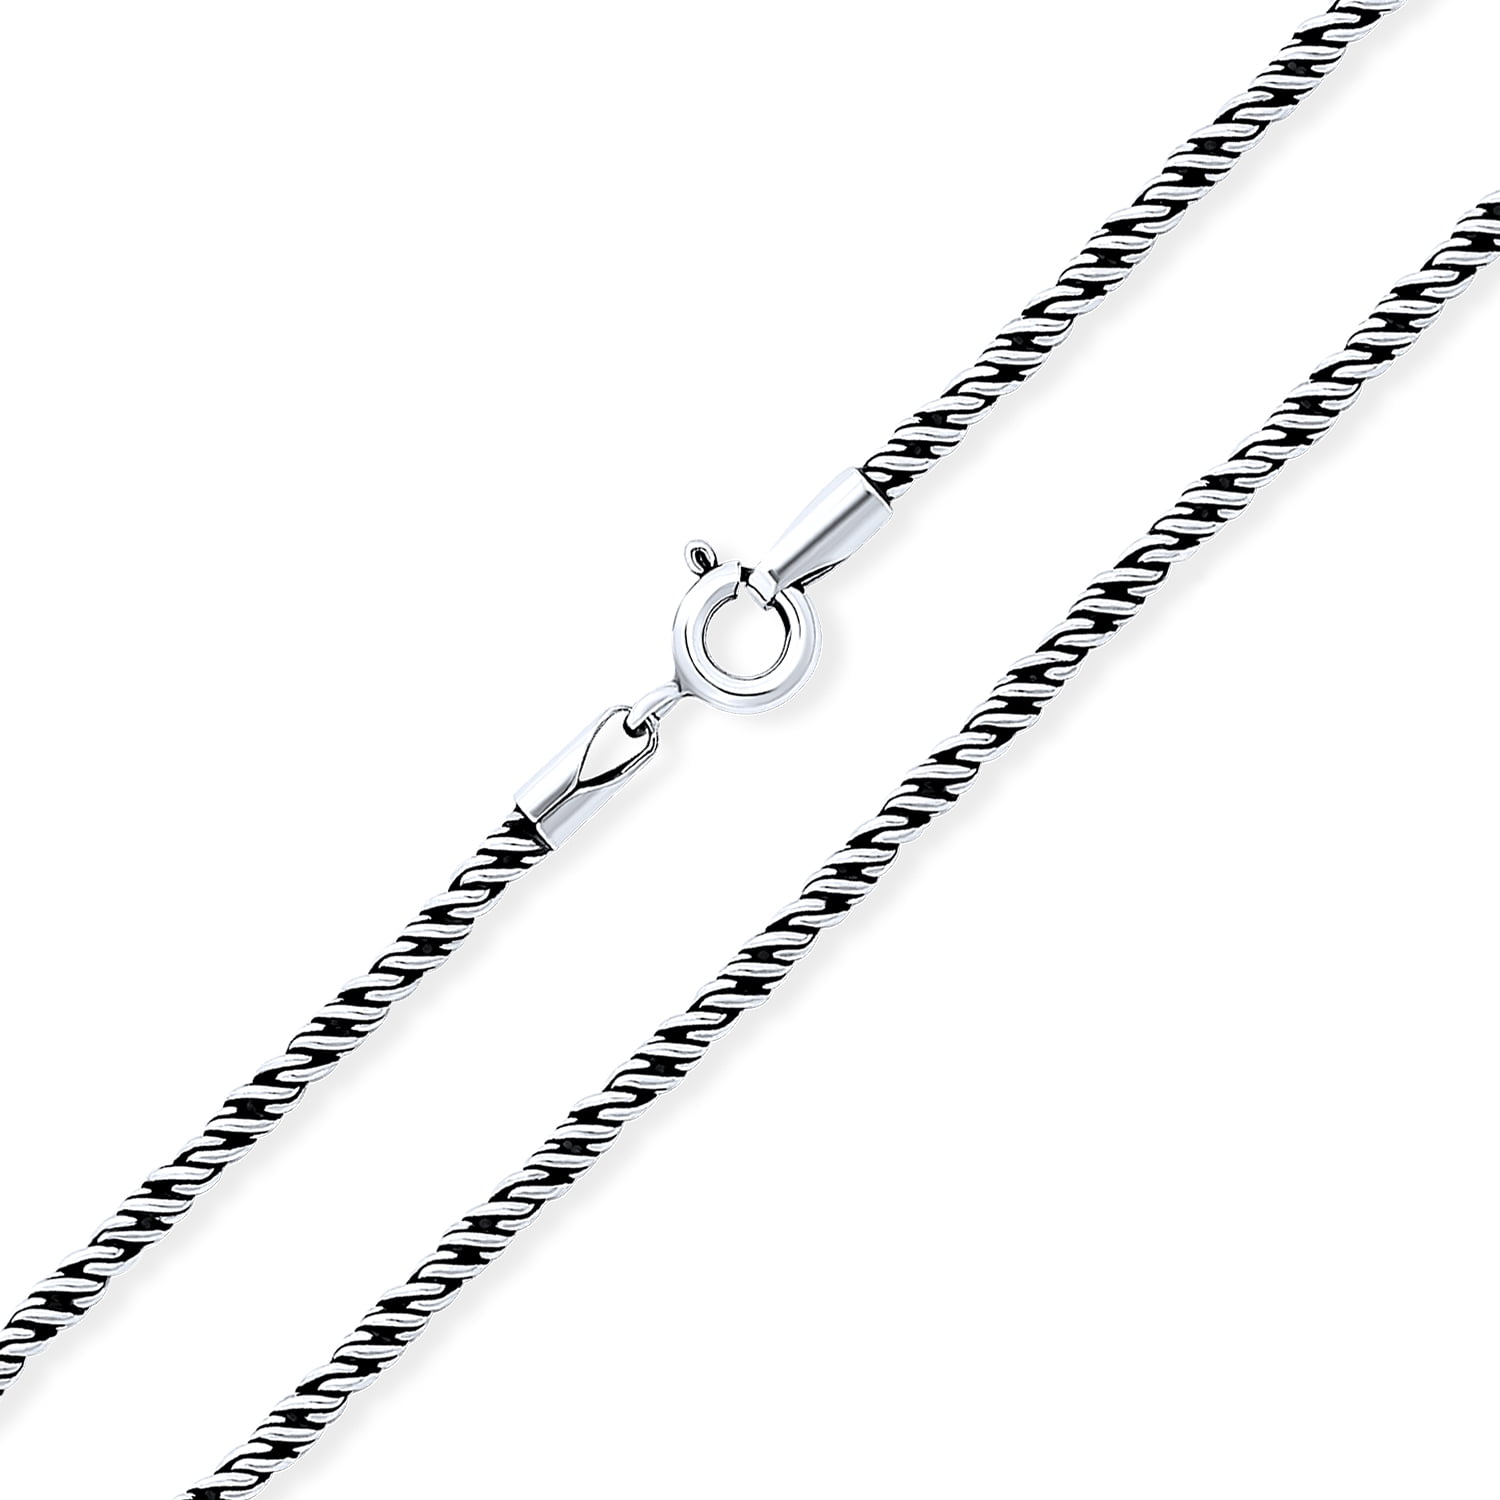 Solid Sterling Silver Spiga Wheat Unisex Chain Necklace 1.7,2.5,3,4,5 mm thick